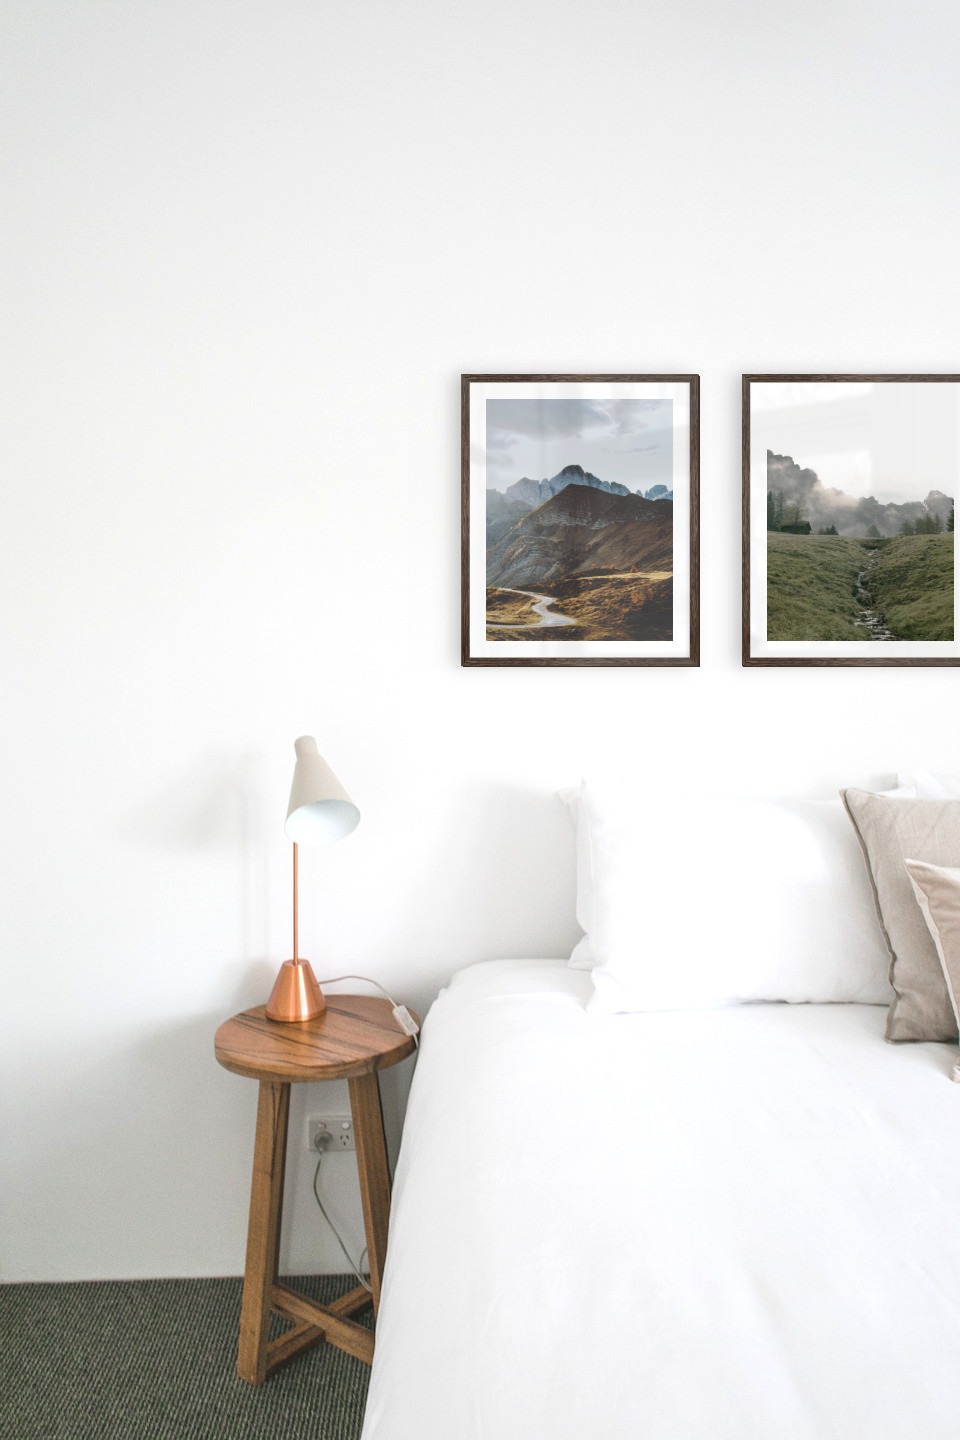 Gallery wall with picture frames in dark wood in sizes 40x50 with prints "Road among the mountains" and "Green valley in front of mountains"